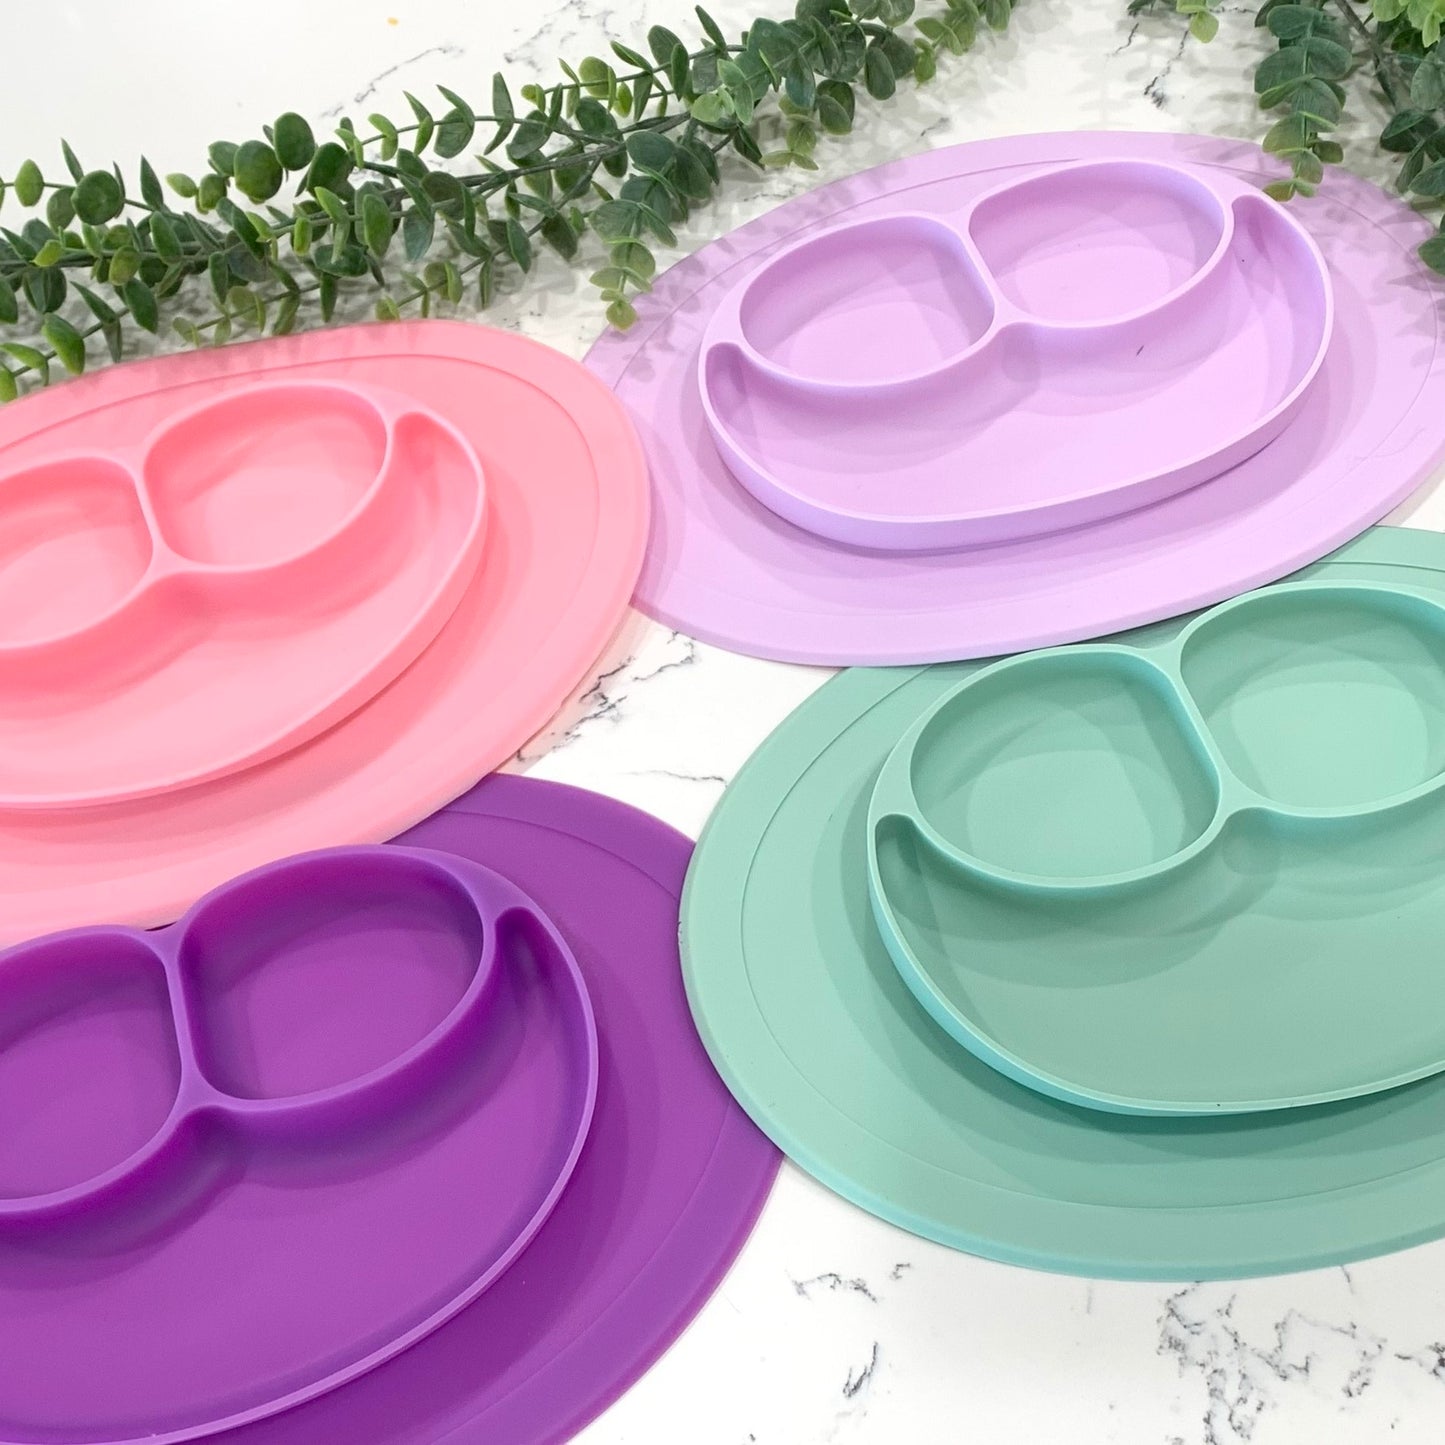 Silicone Baby Plates